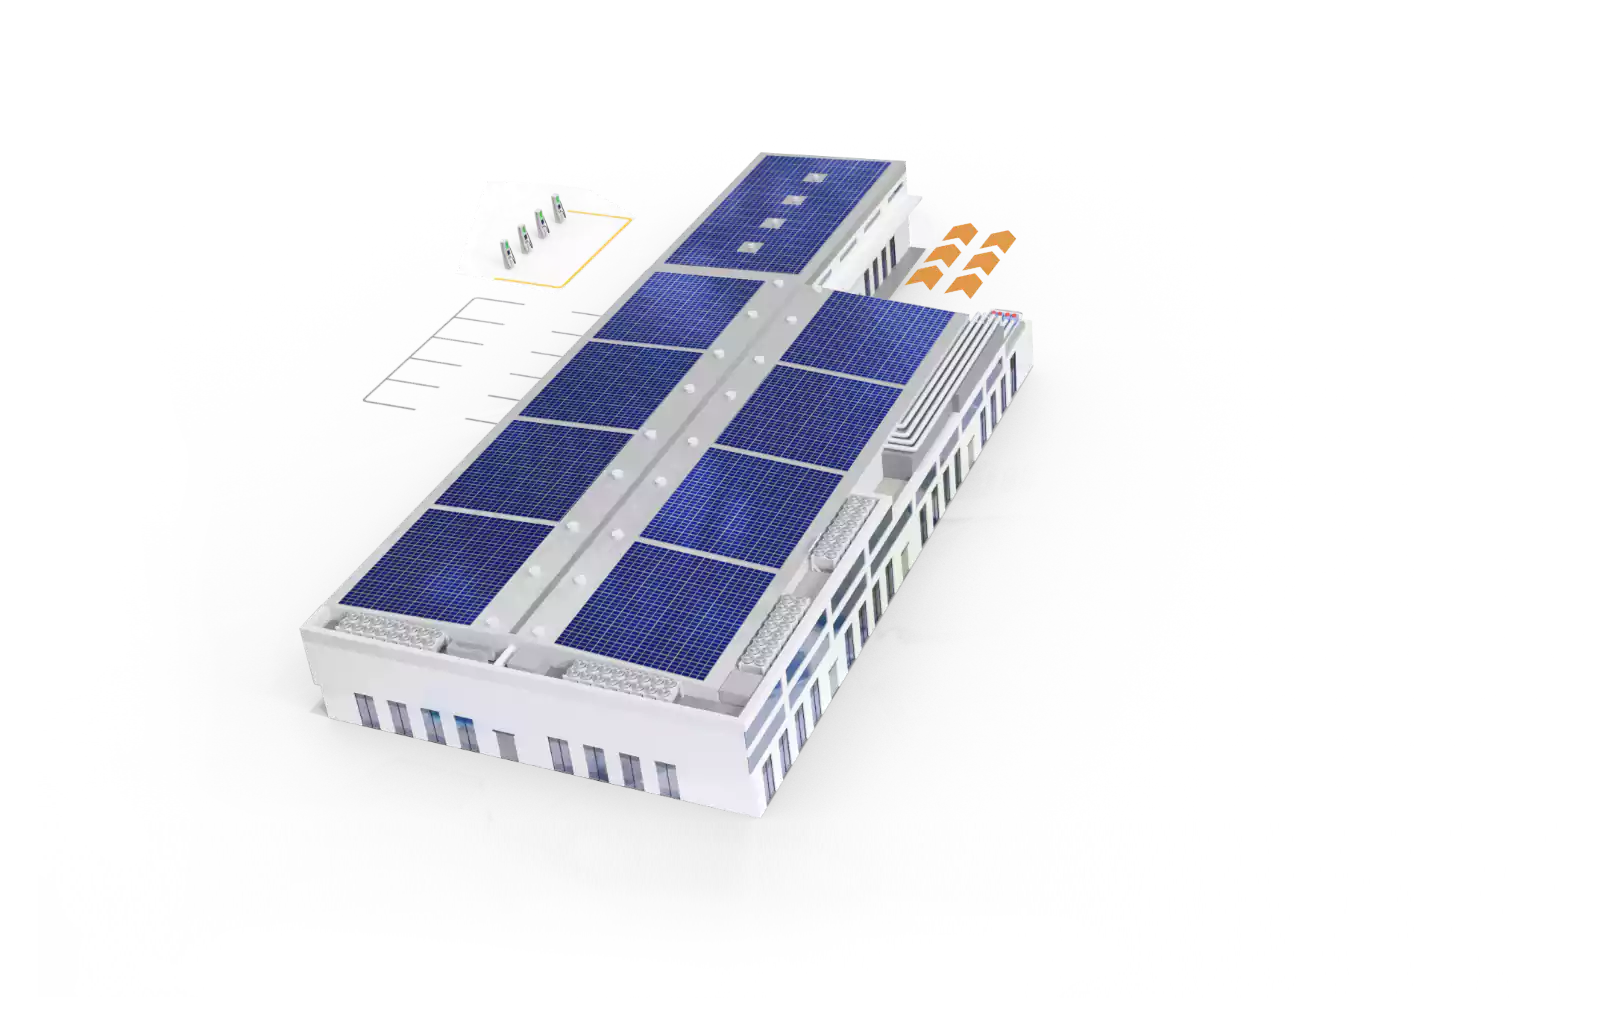 Building model with solar panels